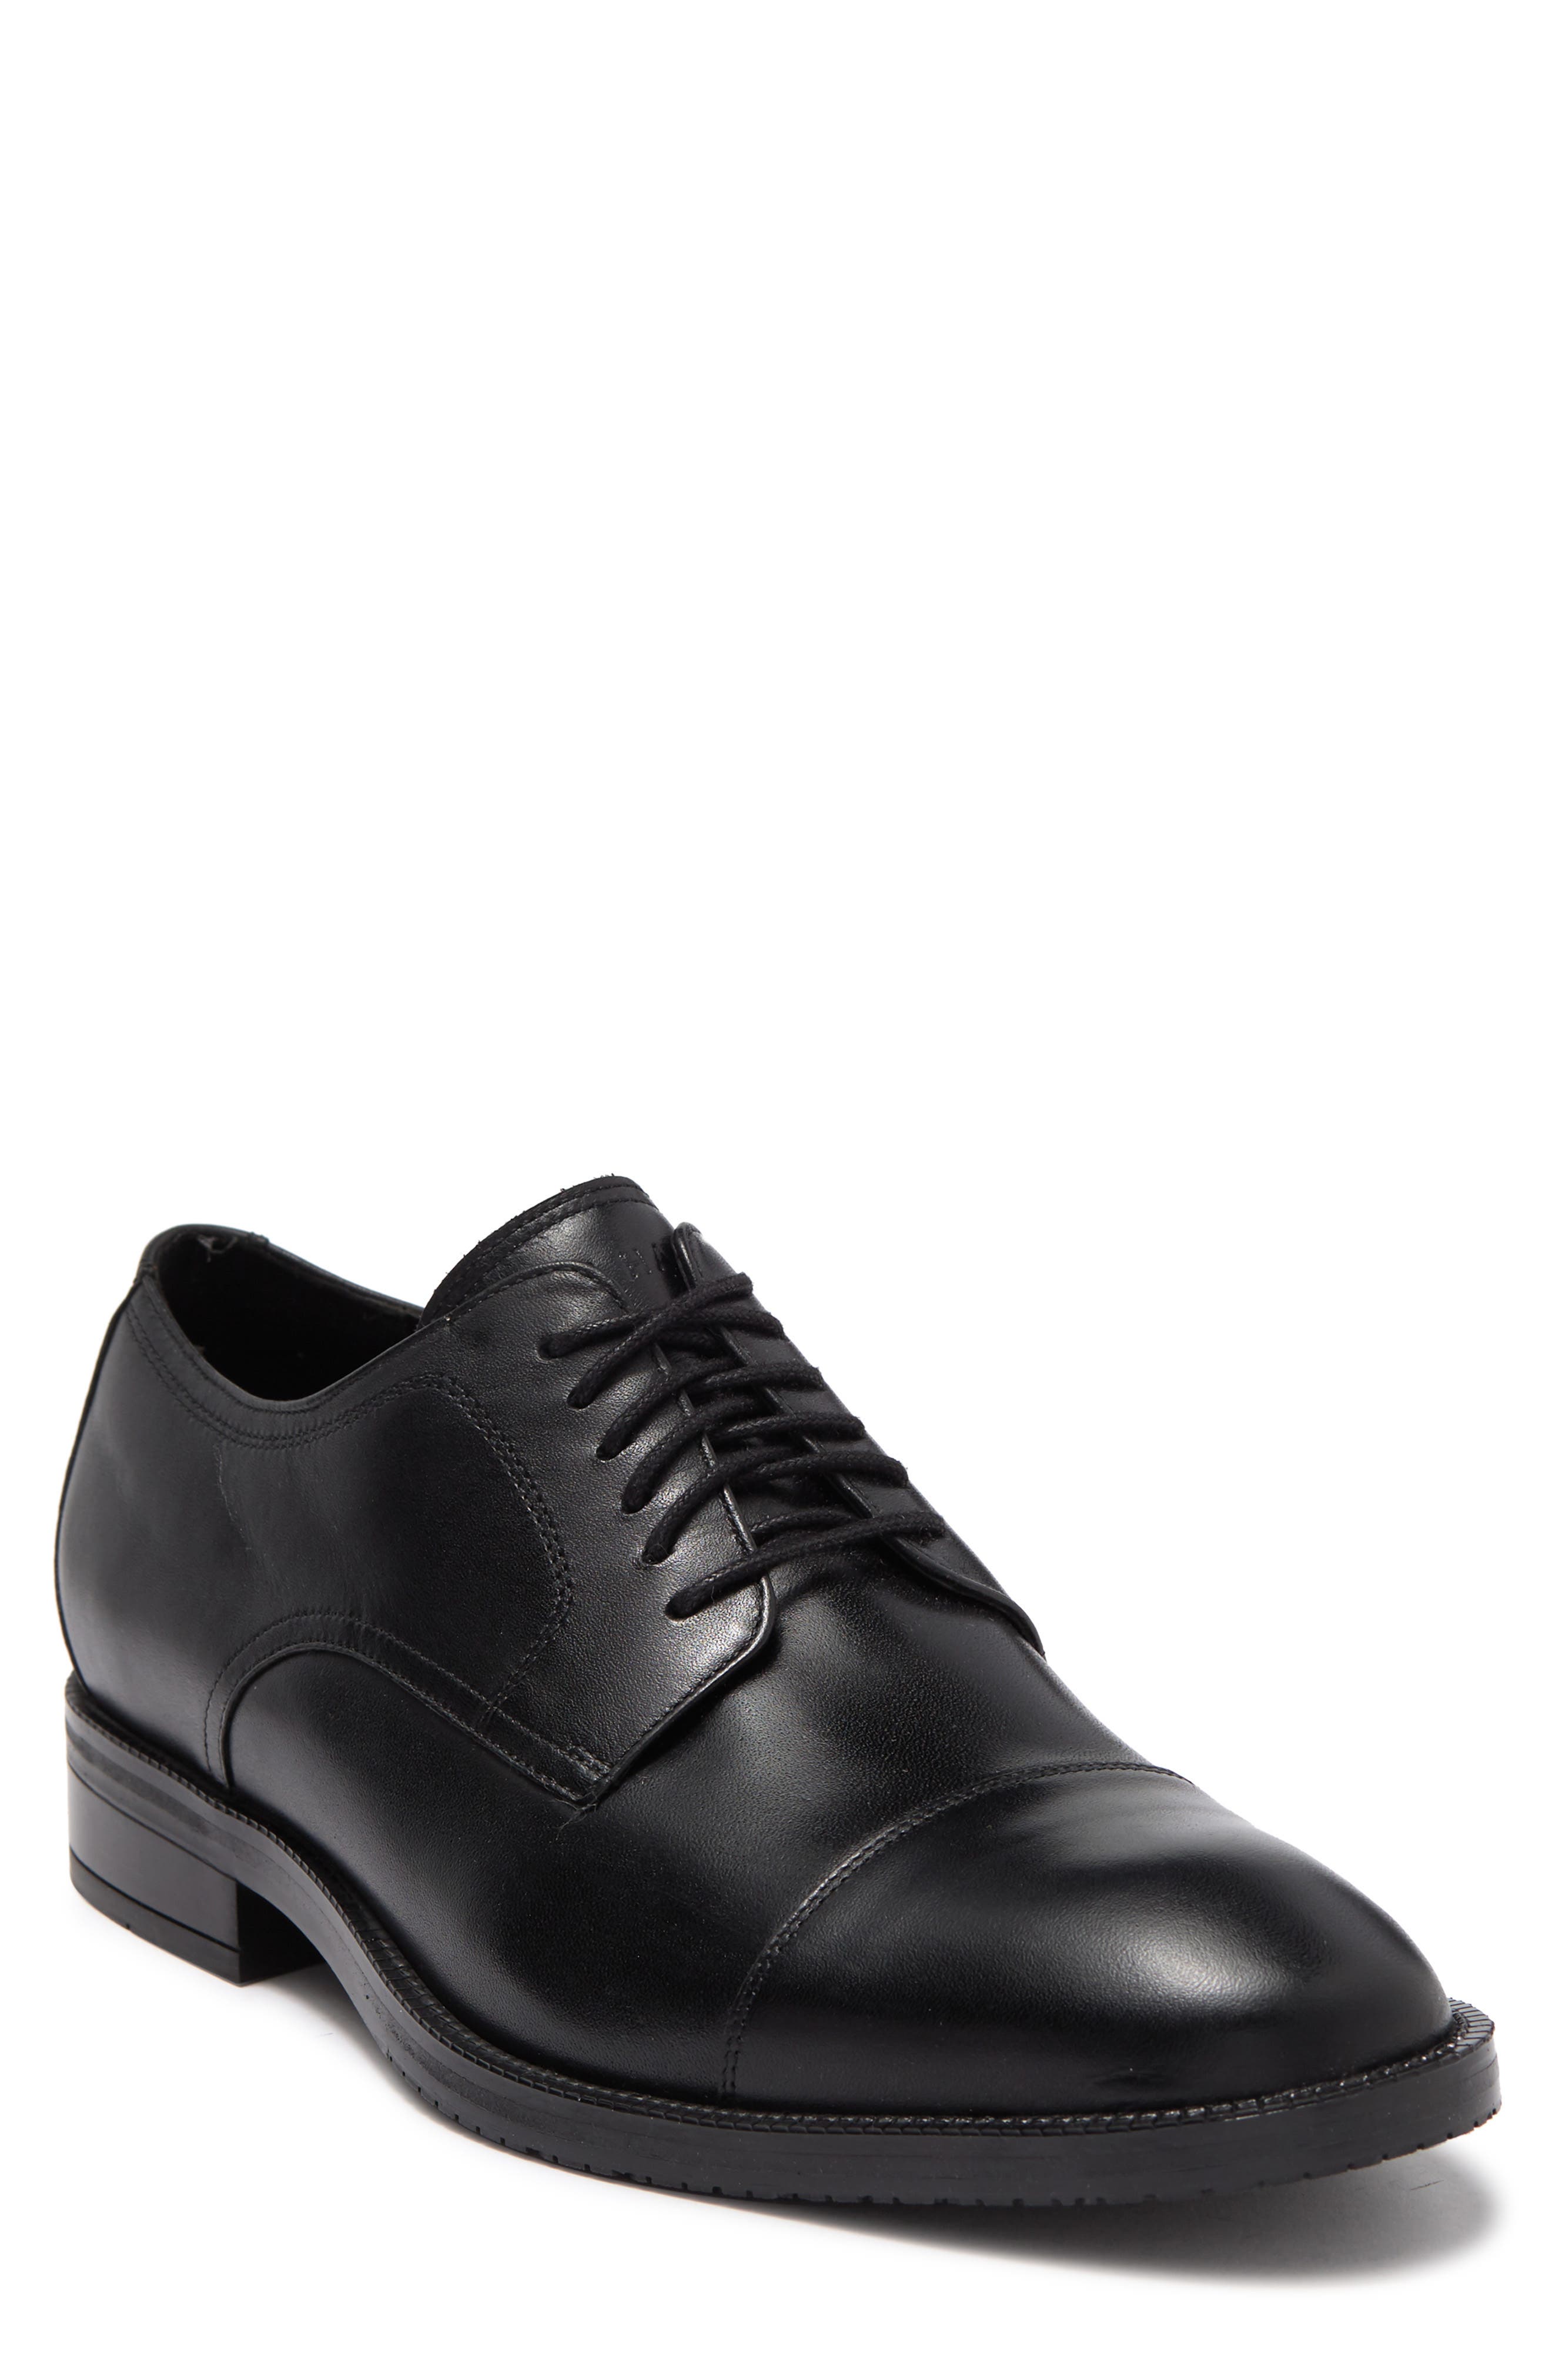 Kenneth Cole New York Mens Wall 2 Wall Cap Toe Oxford Shoes 